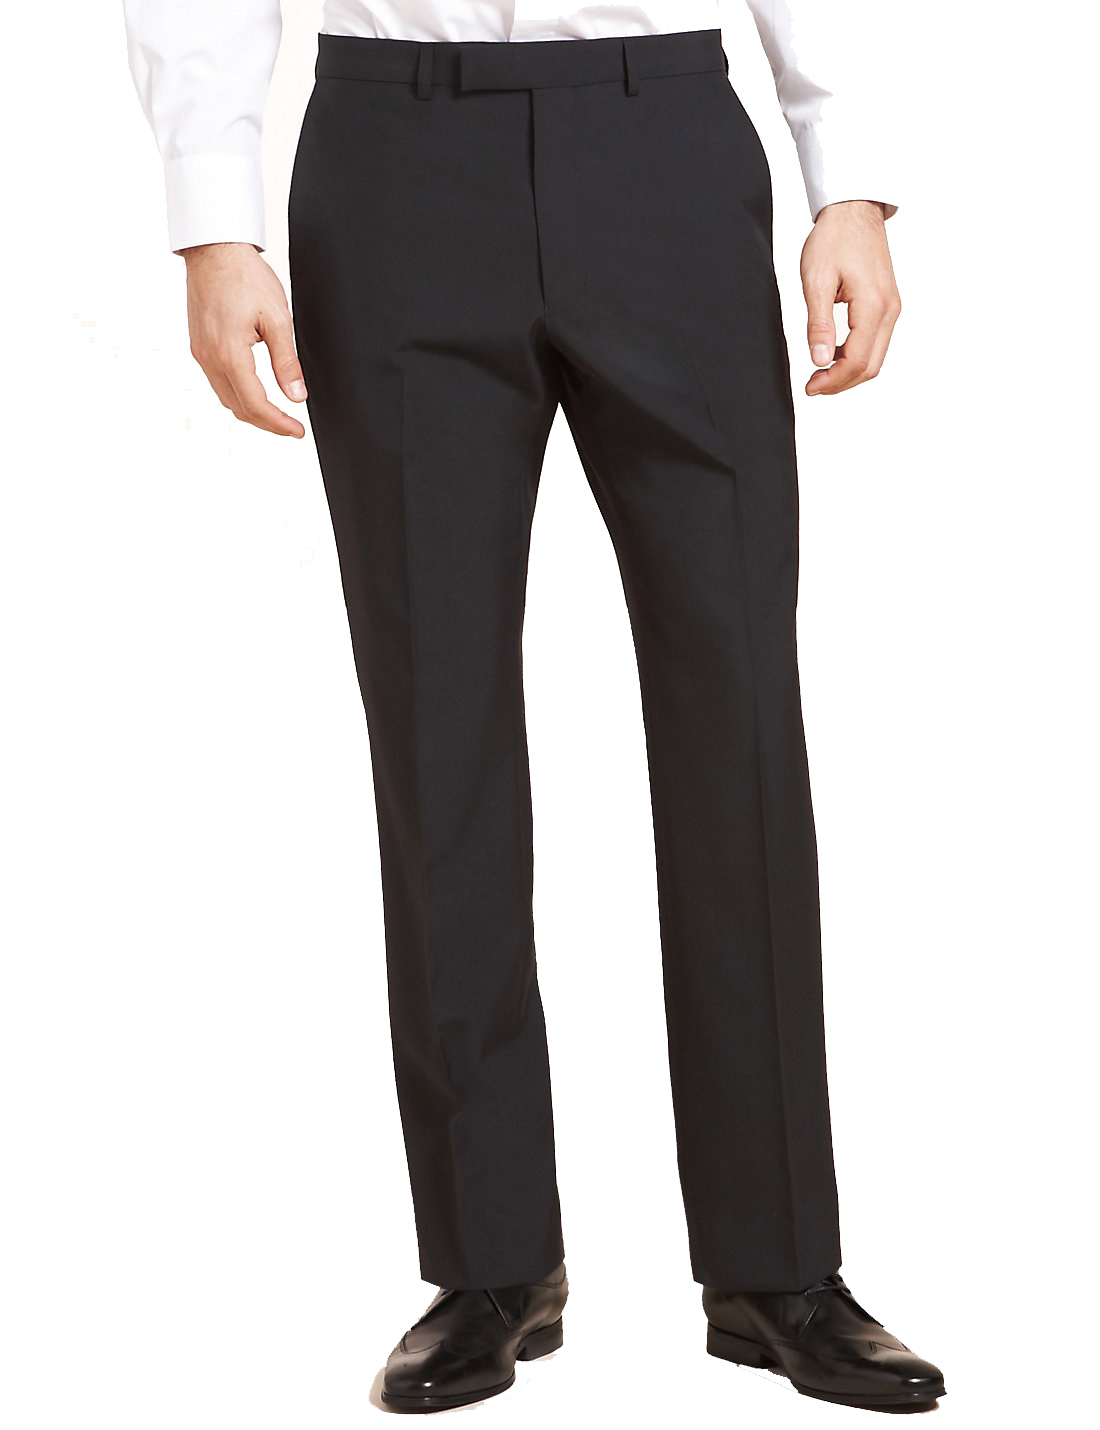 4utograph BLACK Flat Front Trousers with Wool - Waist Size 34 (Length ...